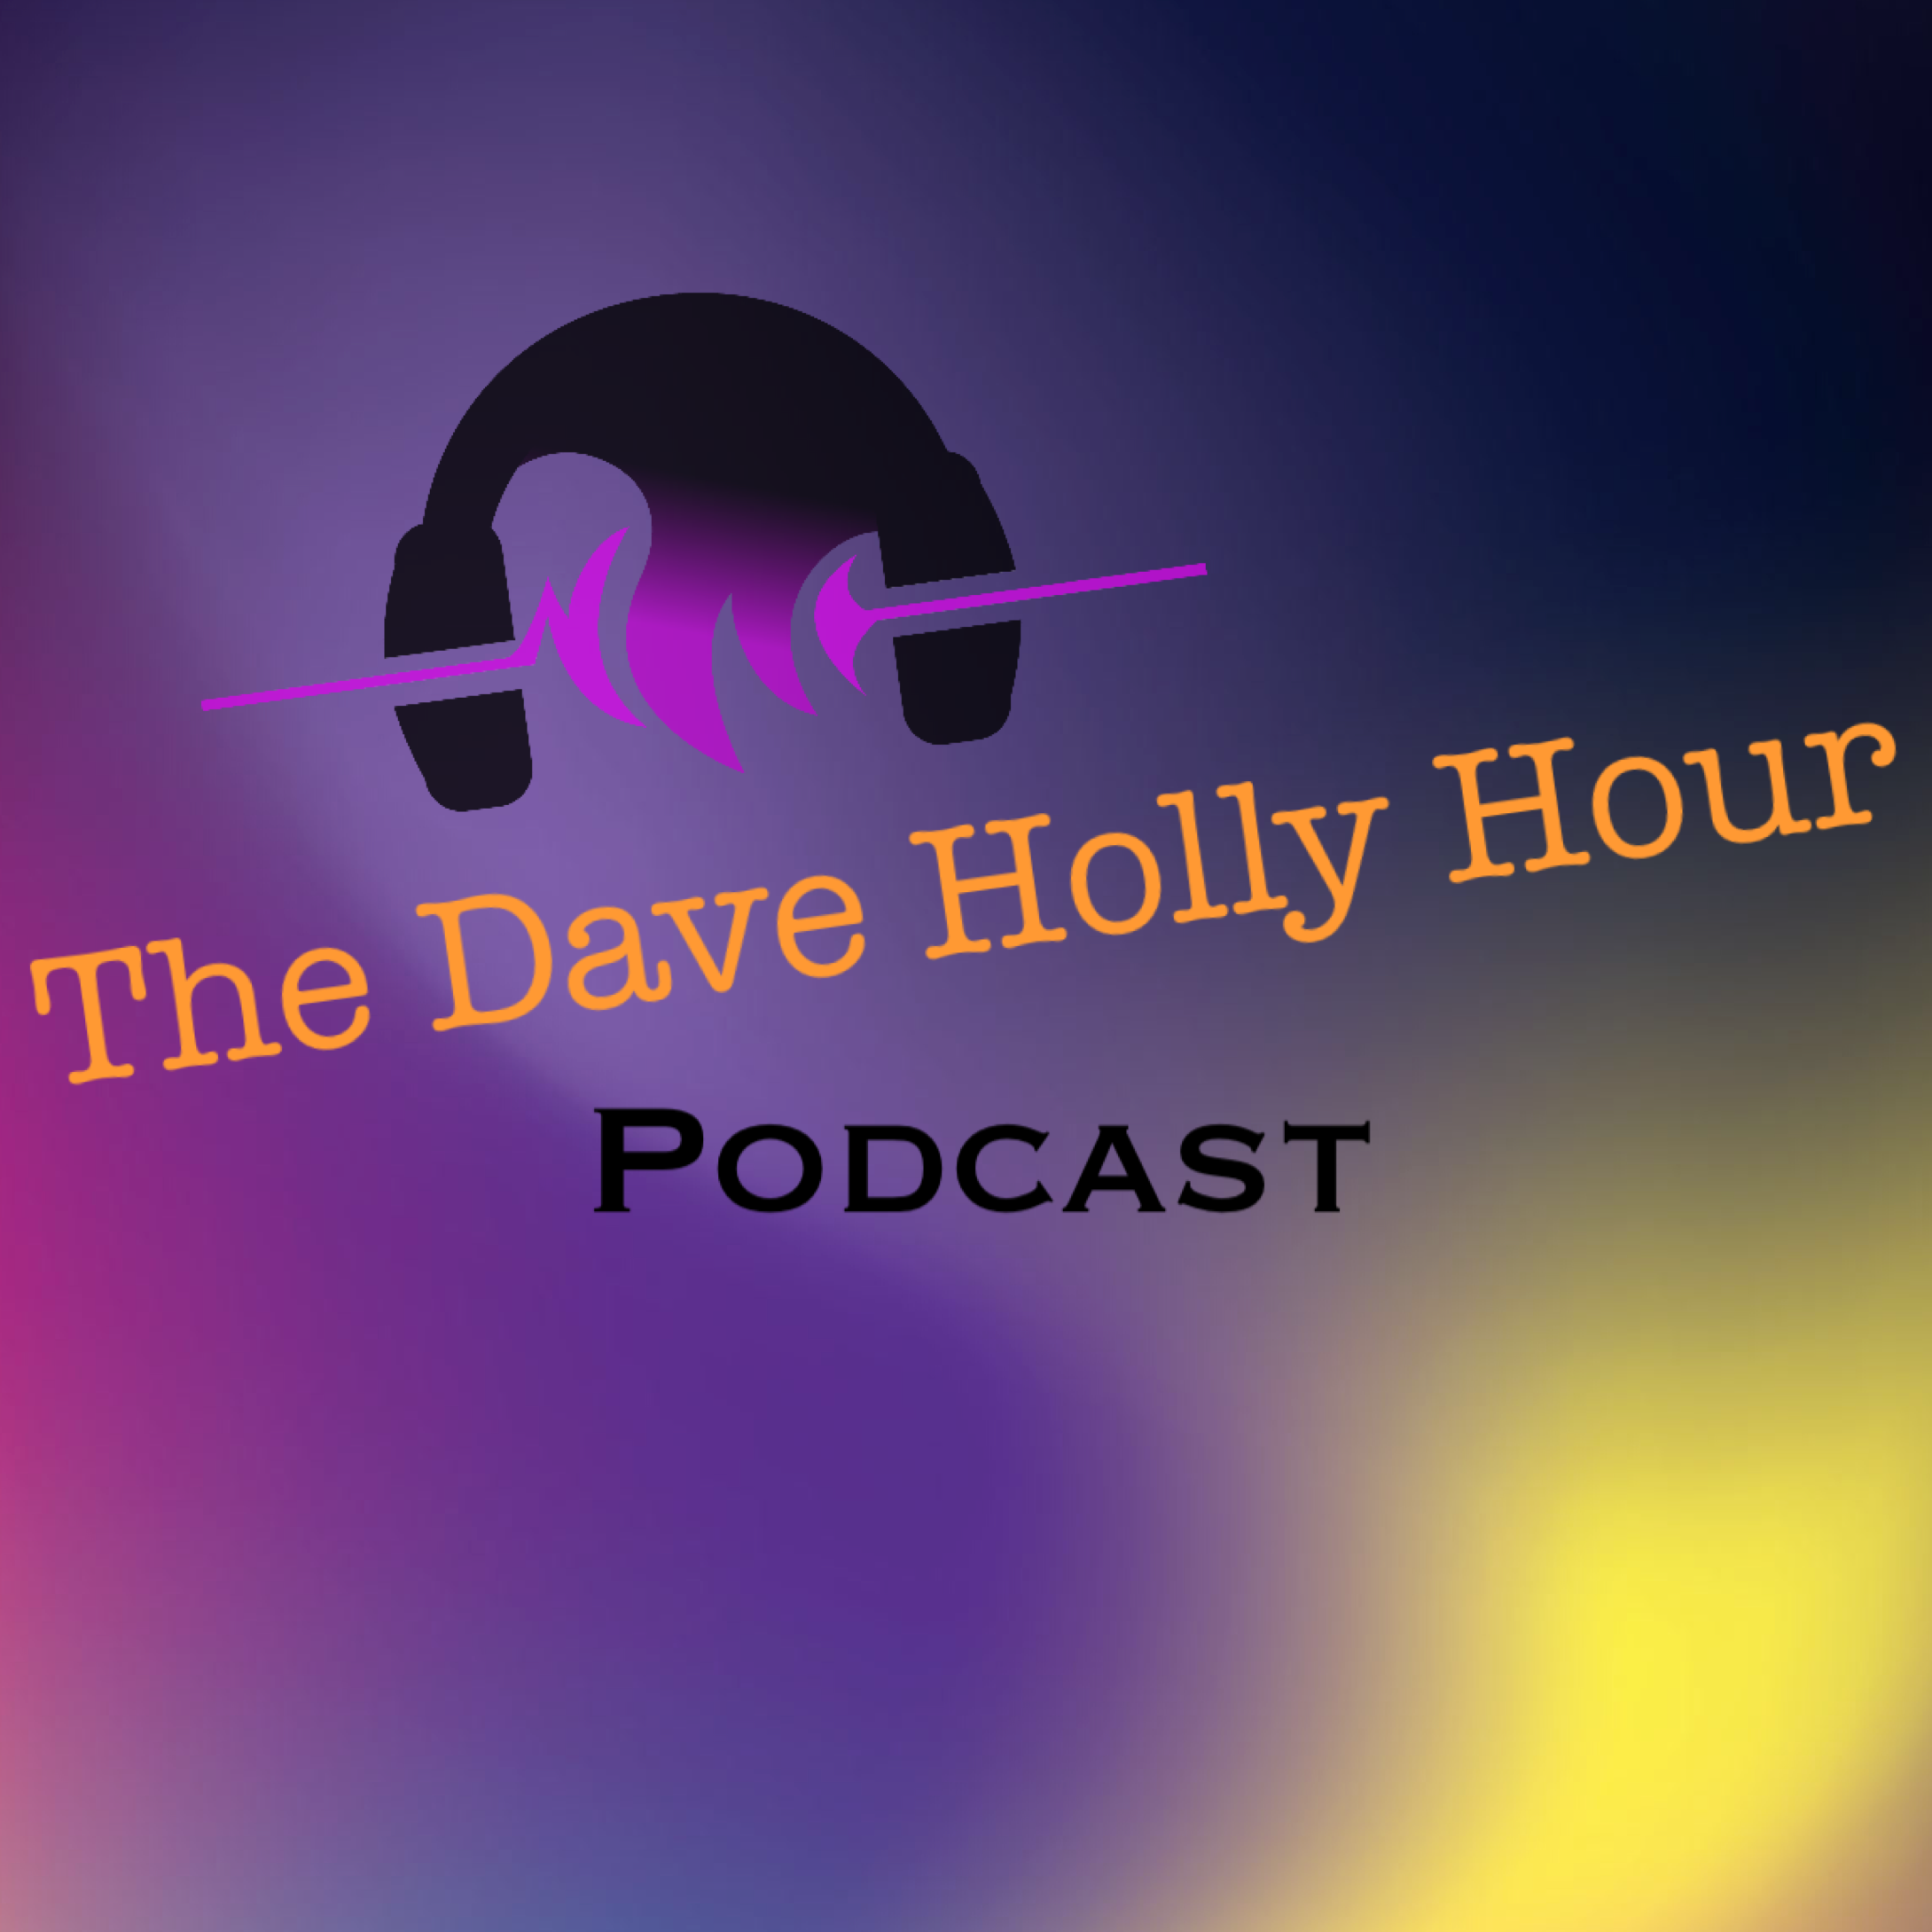 Dave Holly Hour Episode 15 January 16, 2020 Image